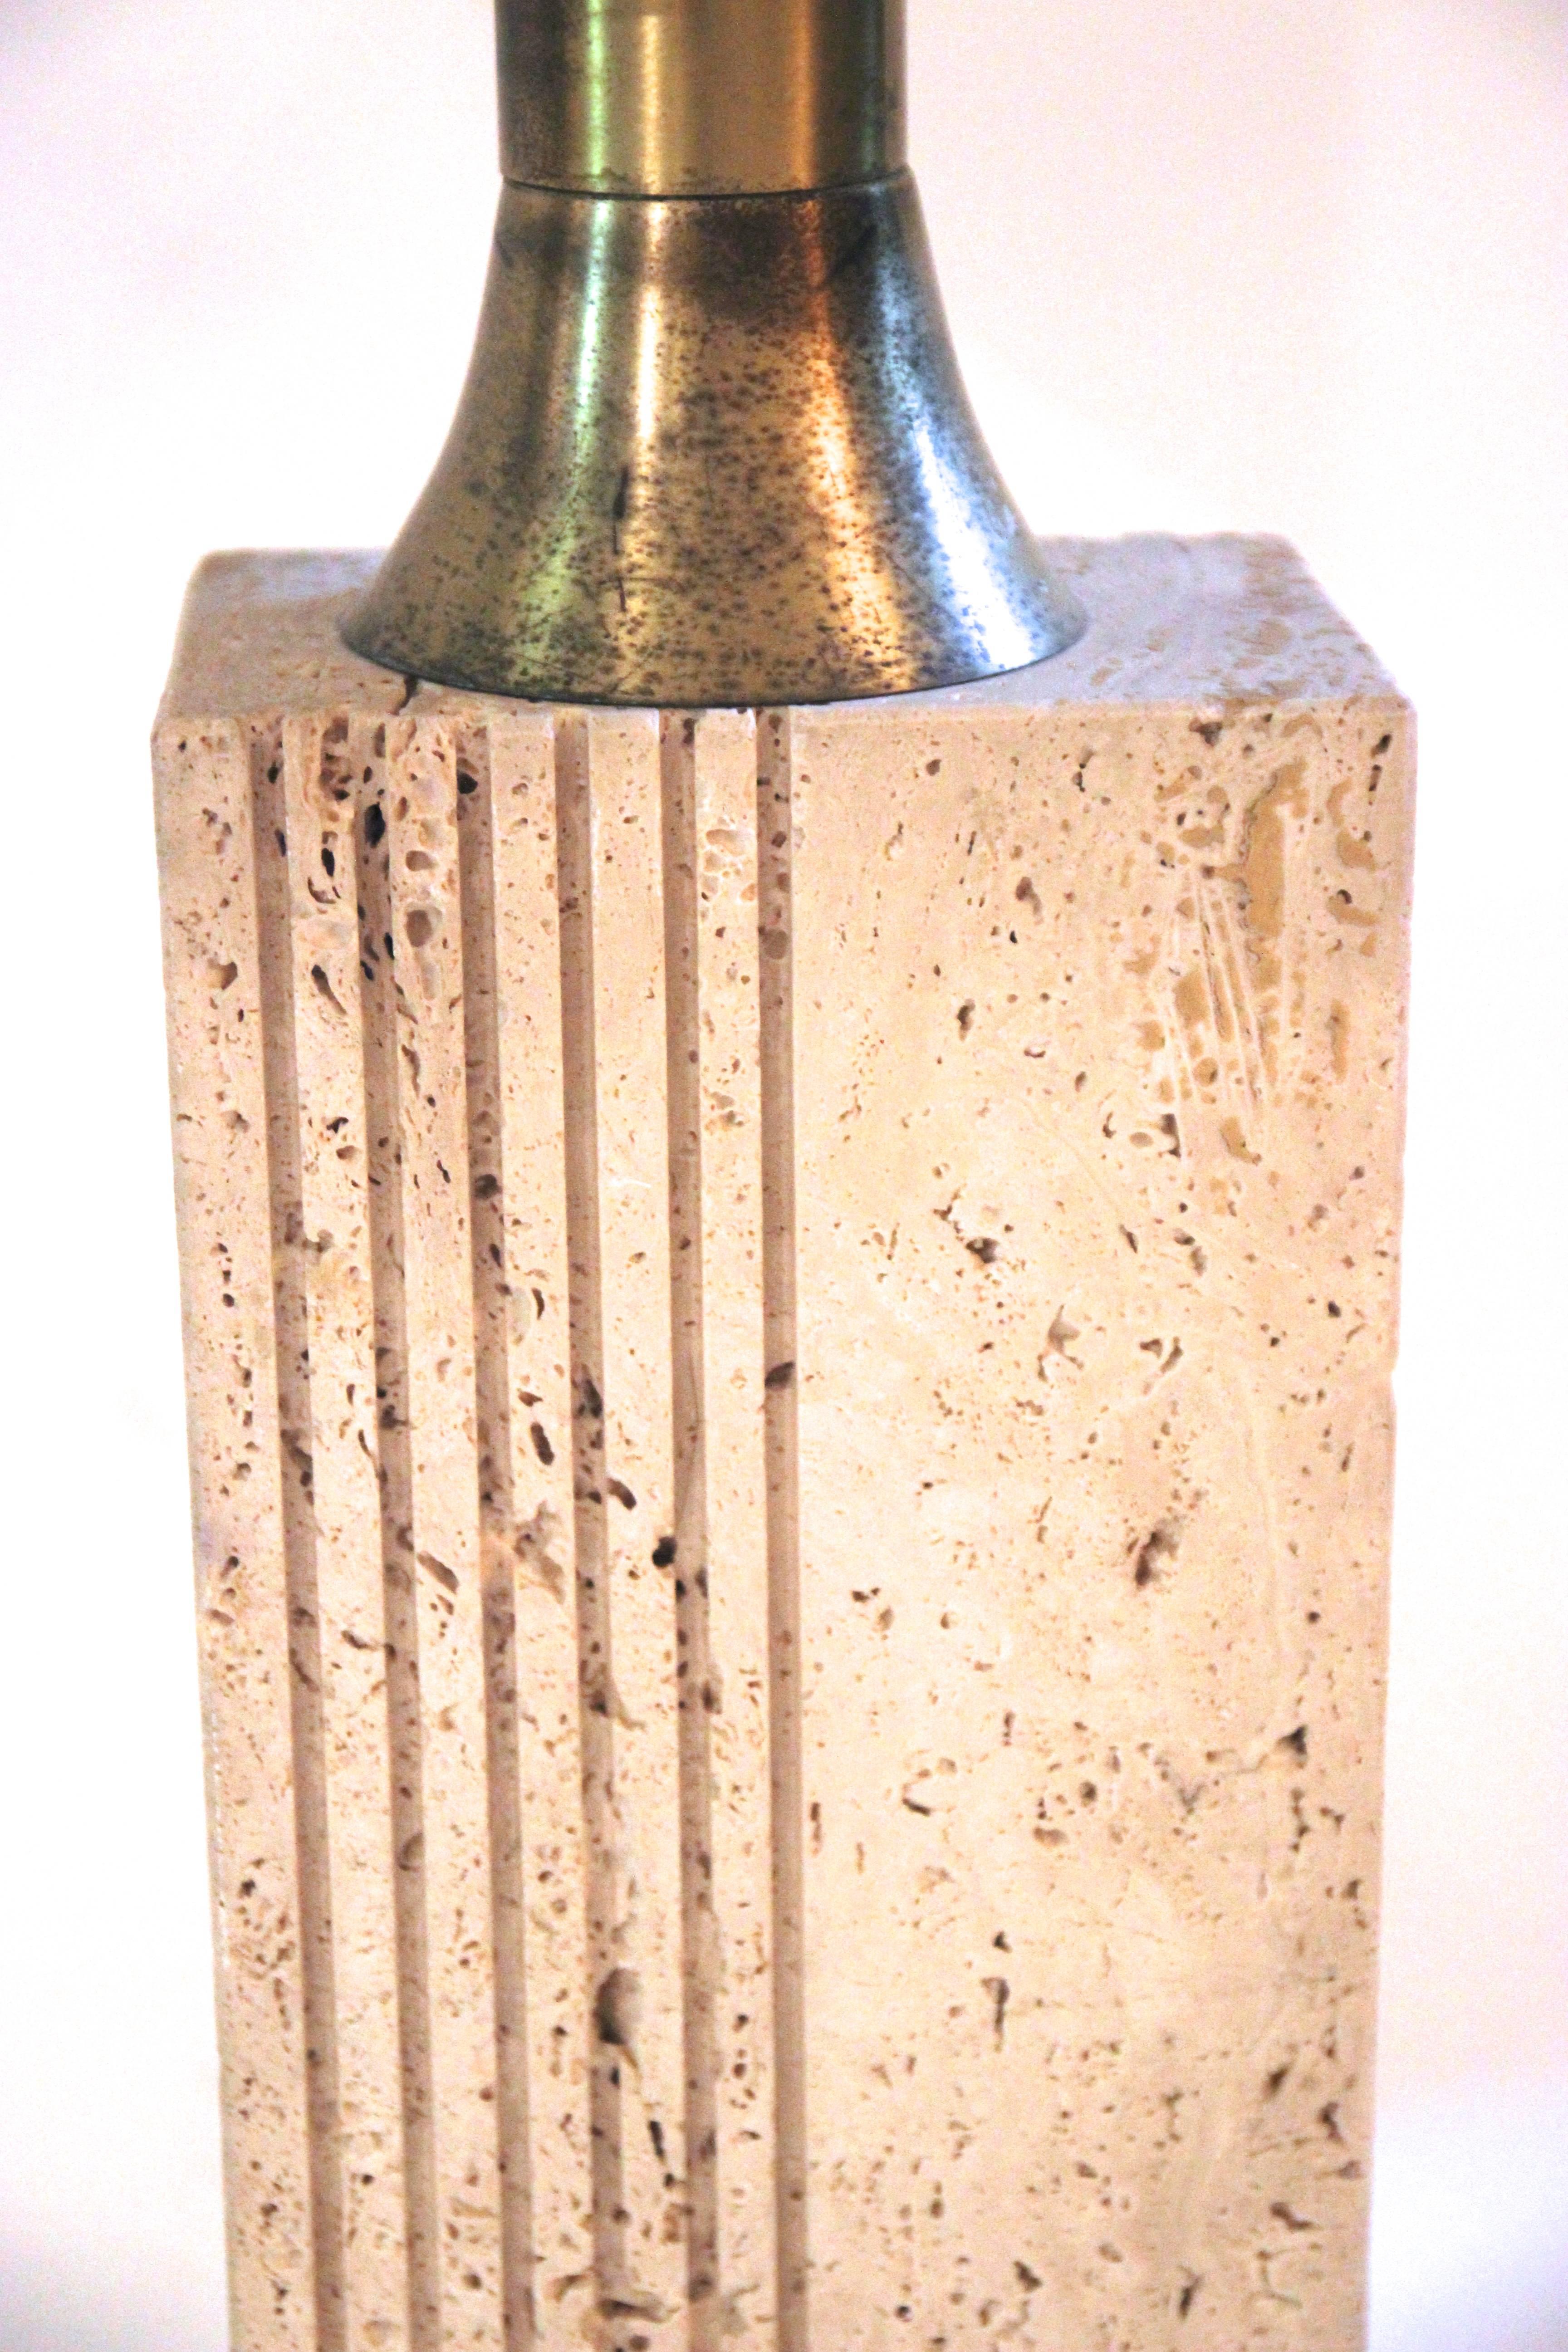 Fratelli Mannelli, table lamp,
travertine and golden brass,
circa 1970, Italy.
Measures: Height 80 cm, width 15 cm, depth 10 cm.